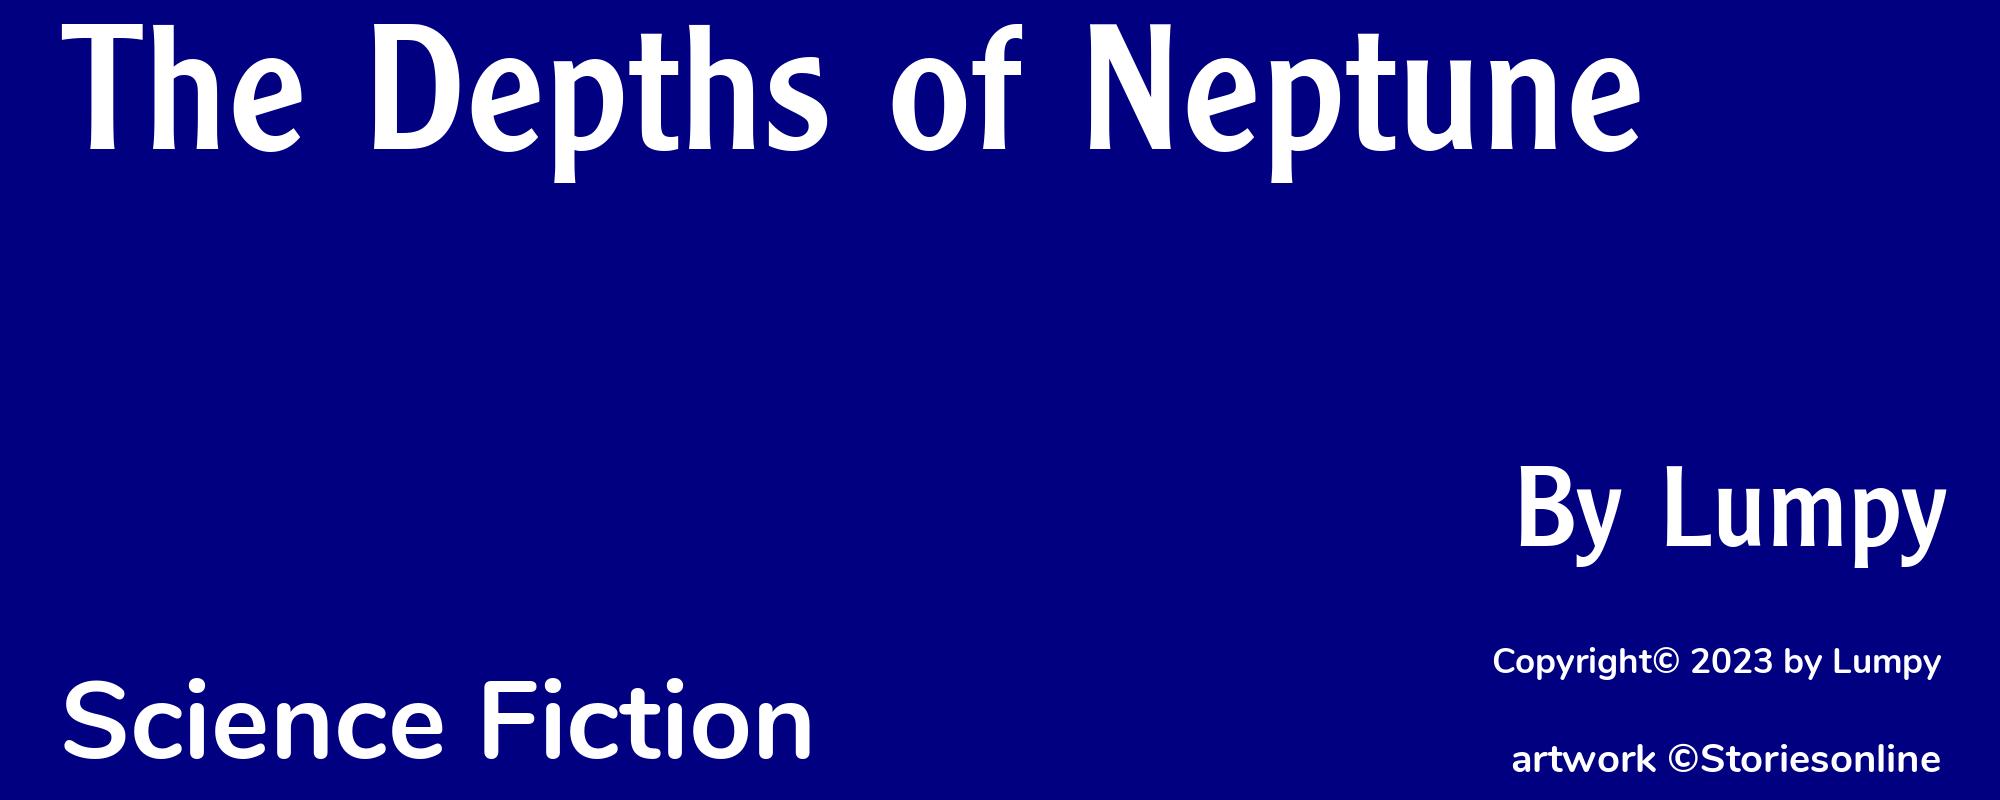 The Depths of Neptune - Cover